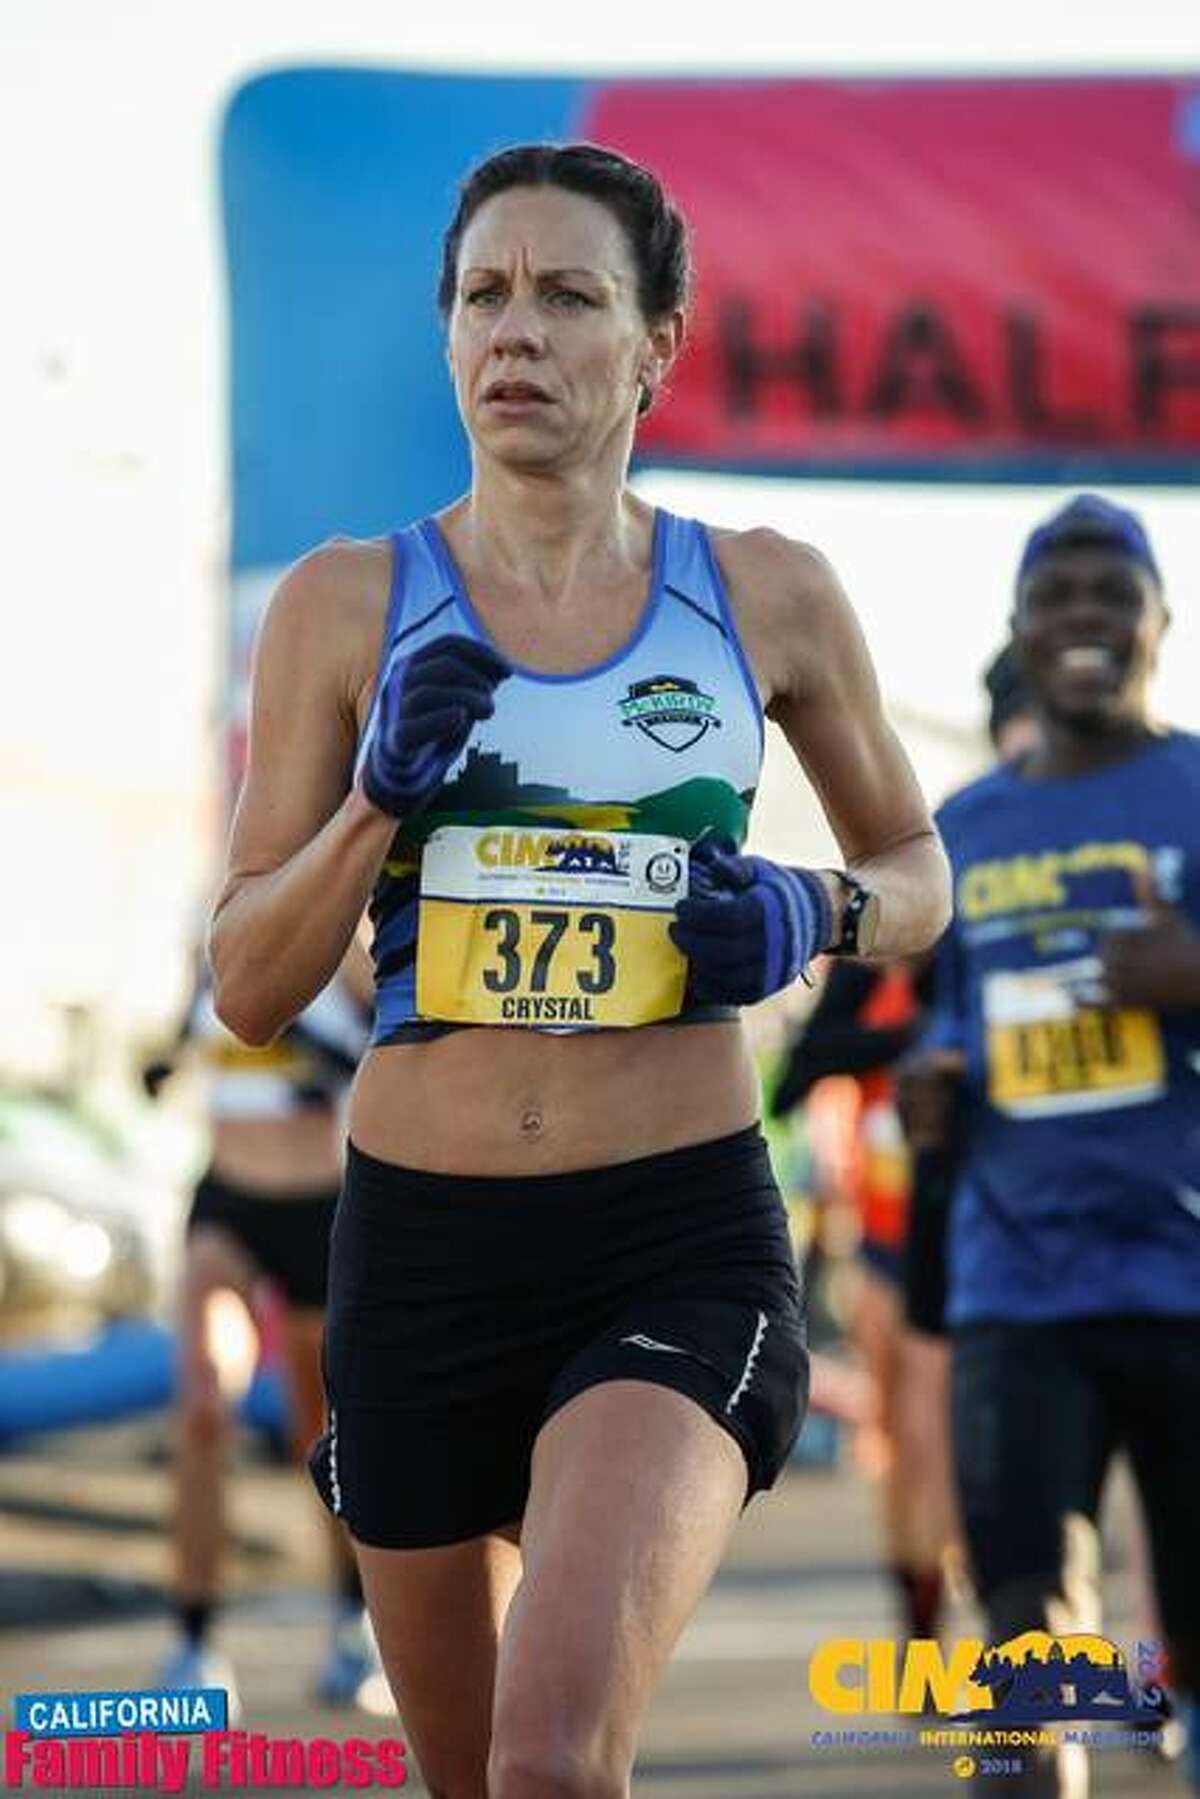 Edwardsville resident Crystal Harriss runs in the California International Marathon on Dec. 2, 2018. Harris posted a time of 2:44.49 and qualified for the U.S. Olympic Marathon Trials, scheduled for Saturday in Atlanta.